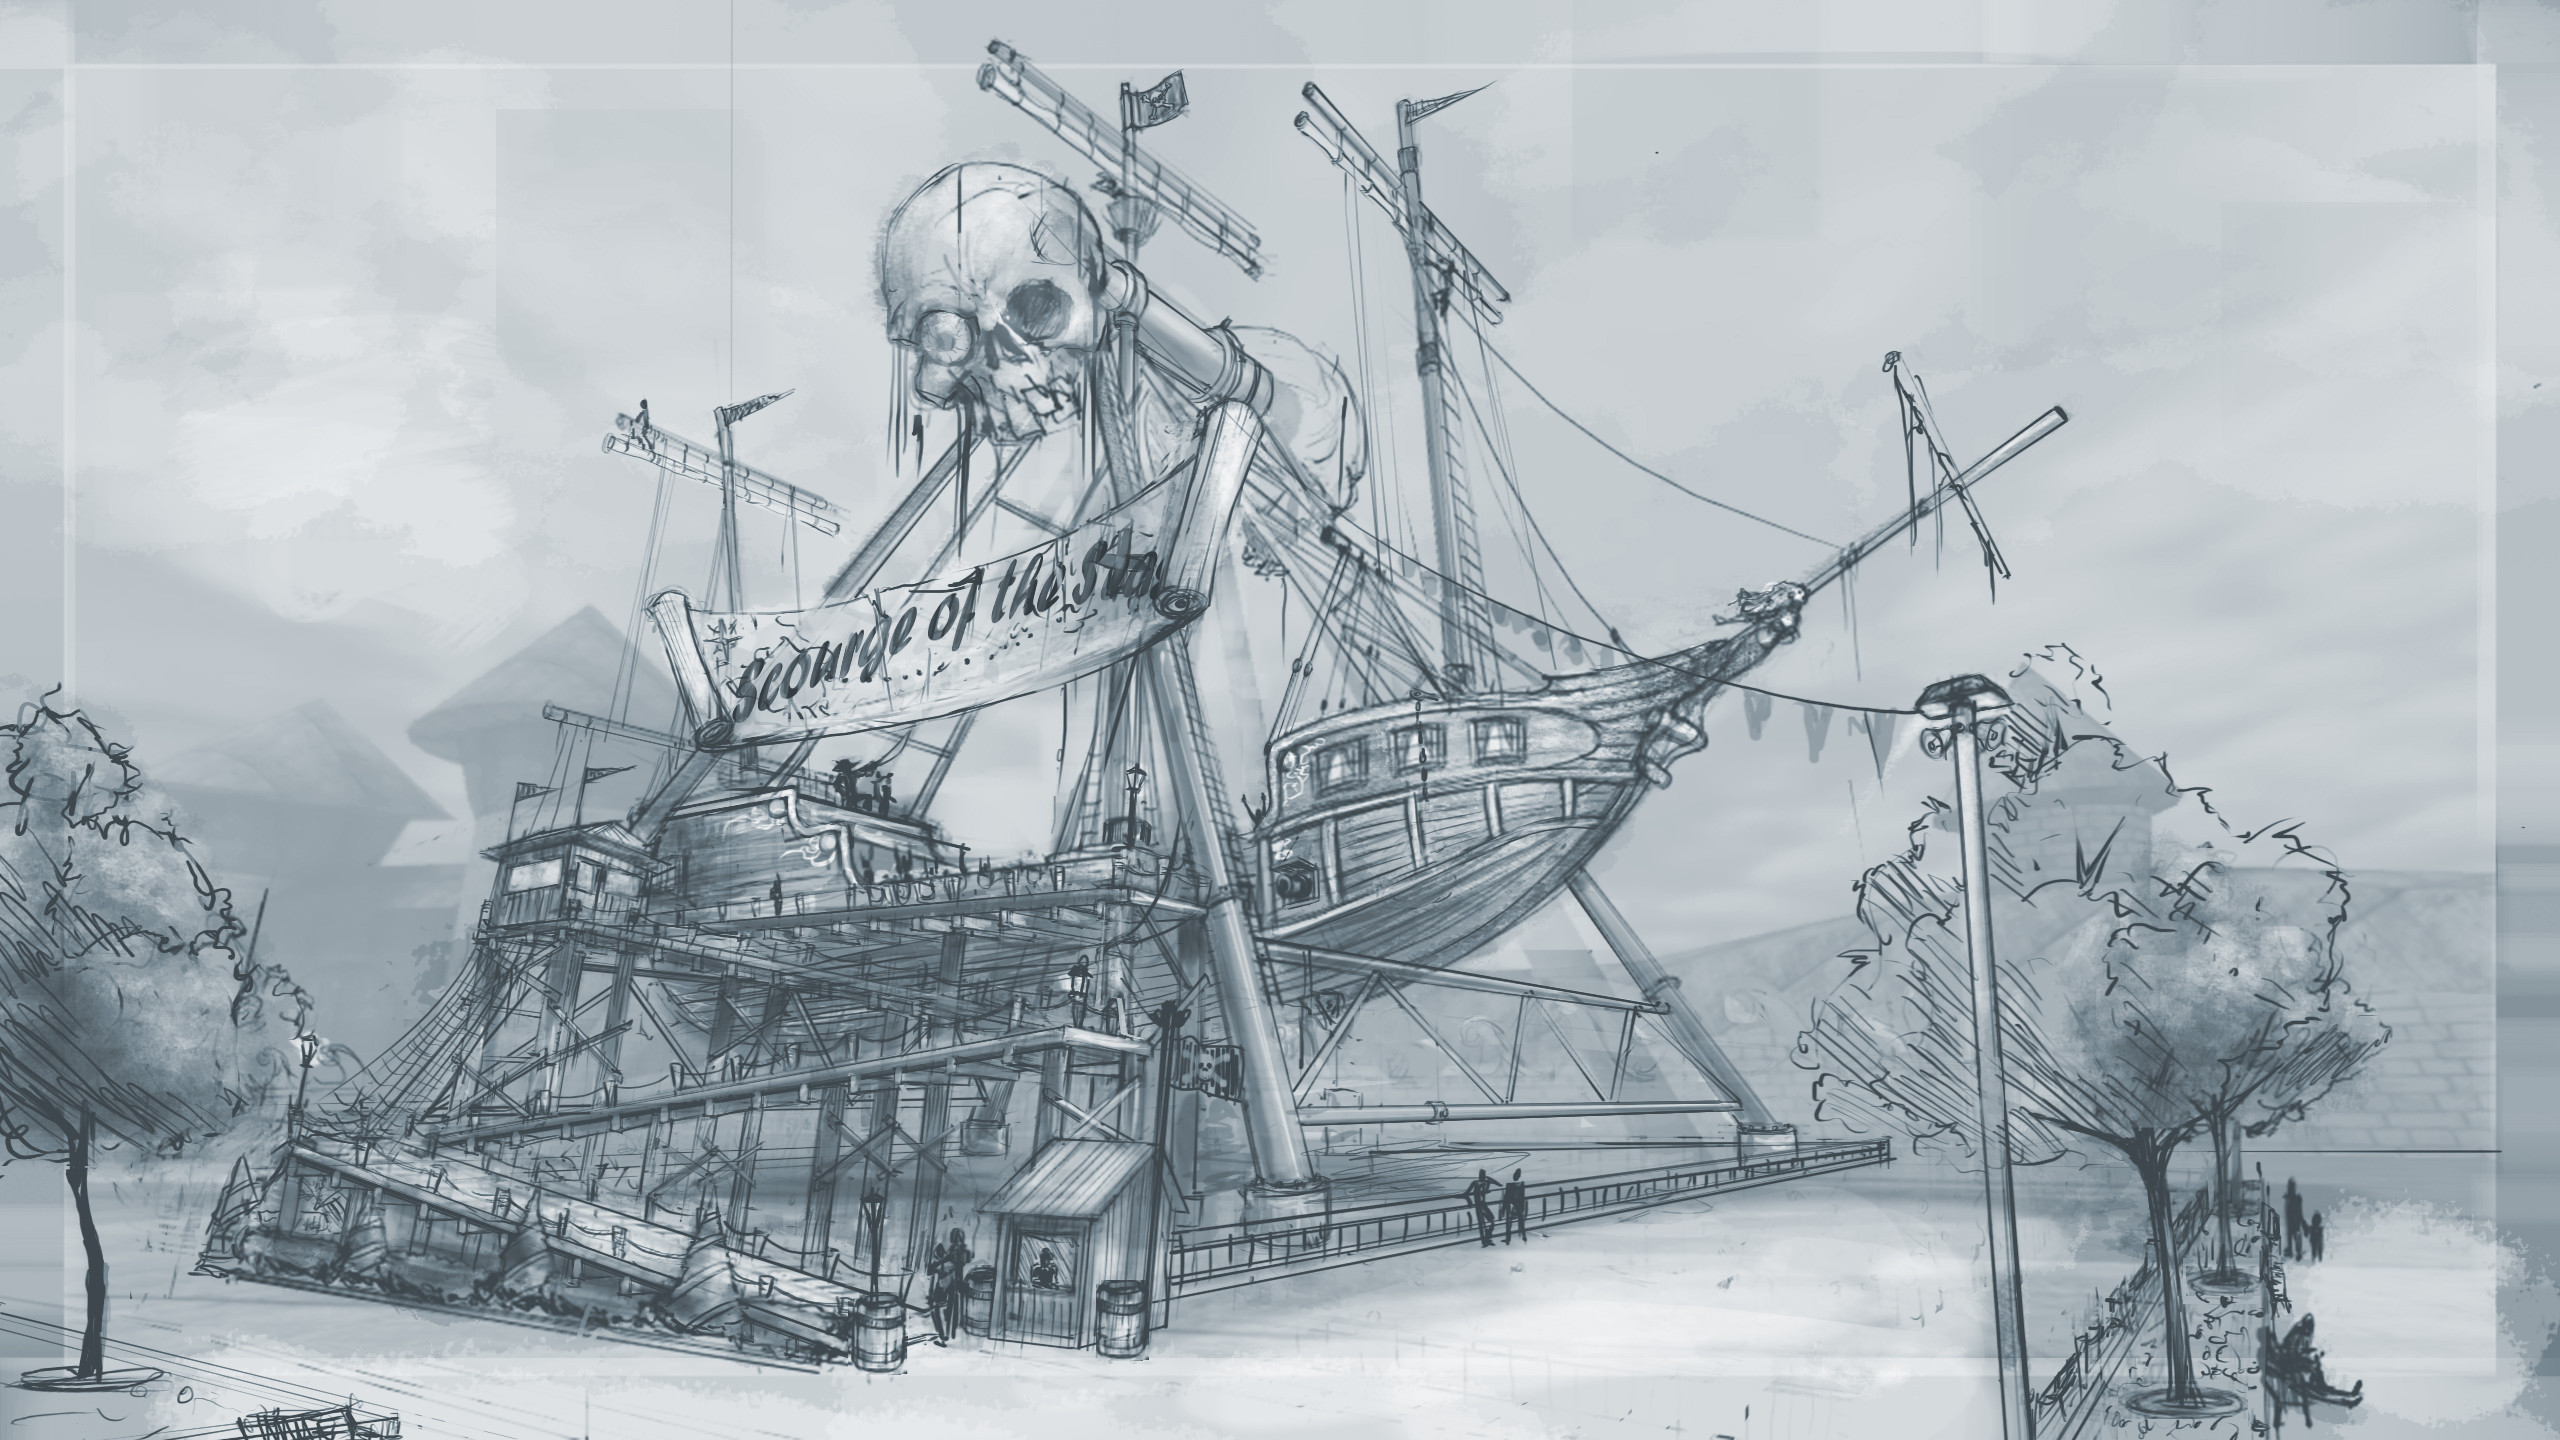 Scourge of the Seas
Concept Drawing